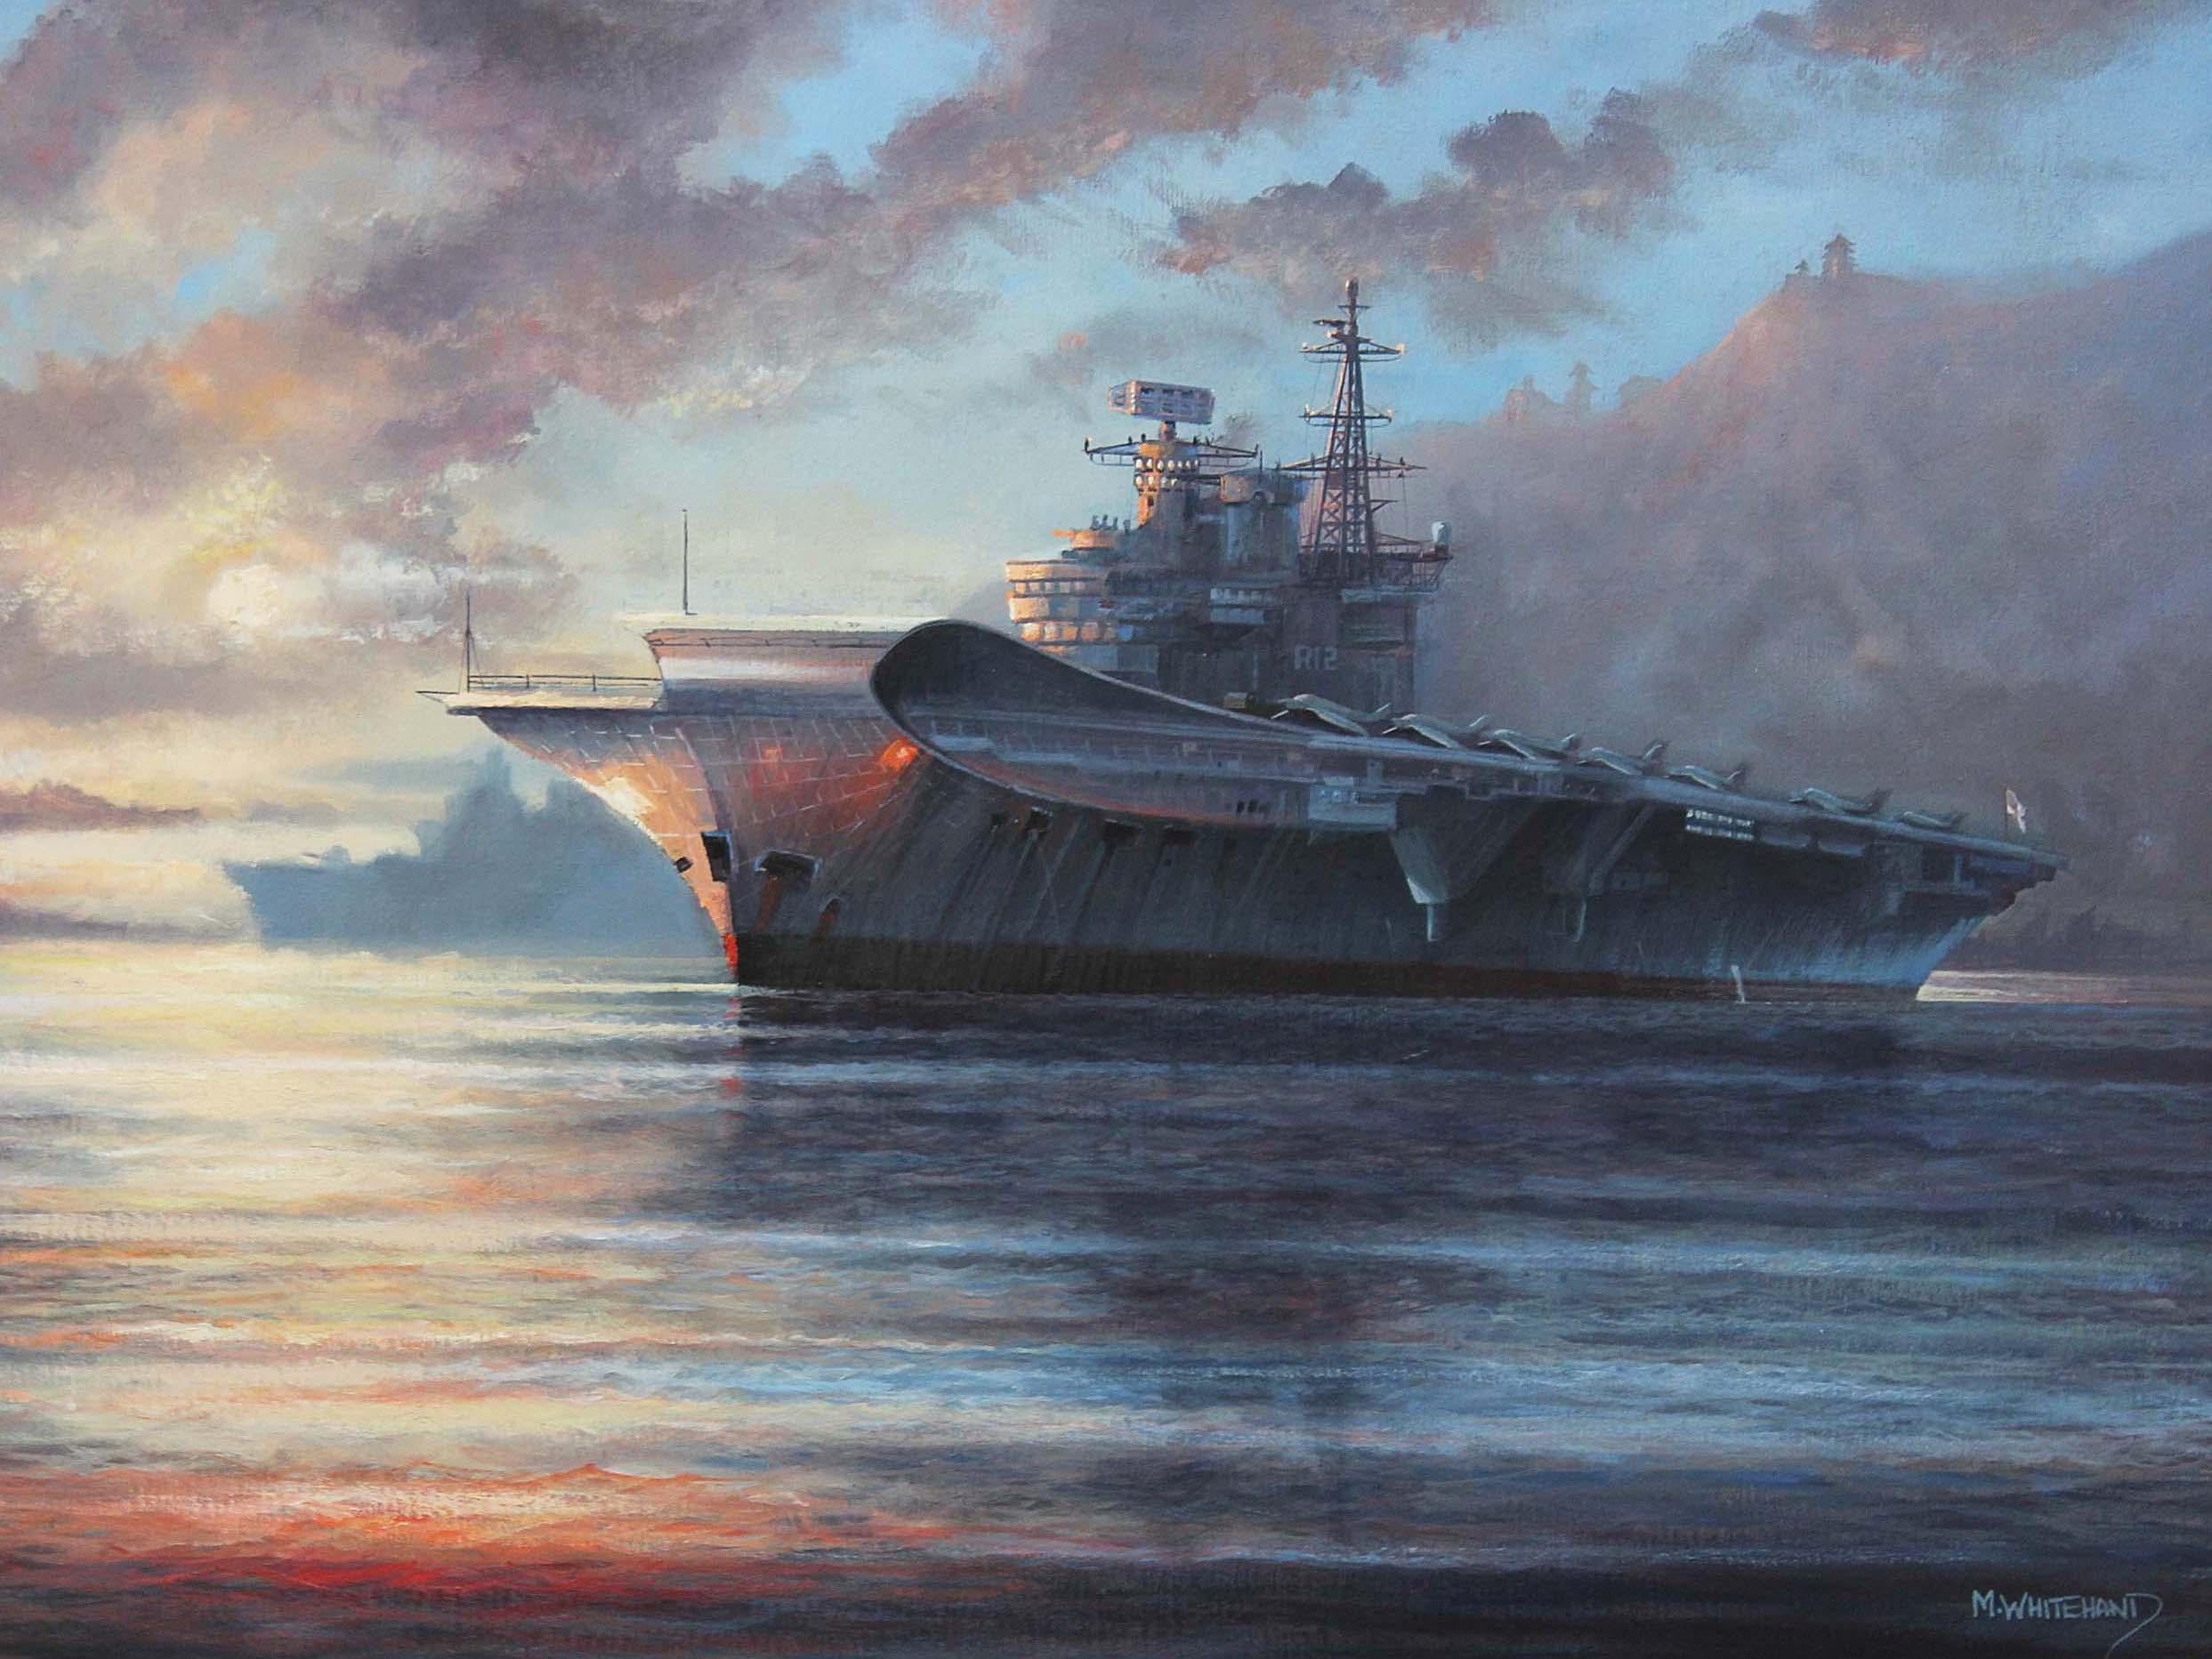 Large oil painting by Michael James Whitehand depicting the British HMS Hermes aircraft carrier shortly after the Falklands War. The artwork exudes a captivating atmosphere and skillful use of light.

Similar-sized paintings by this artist have